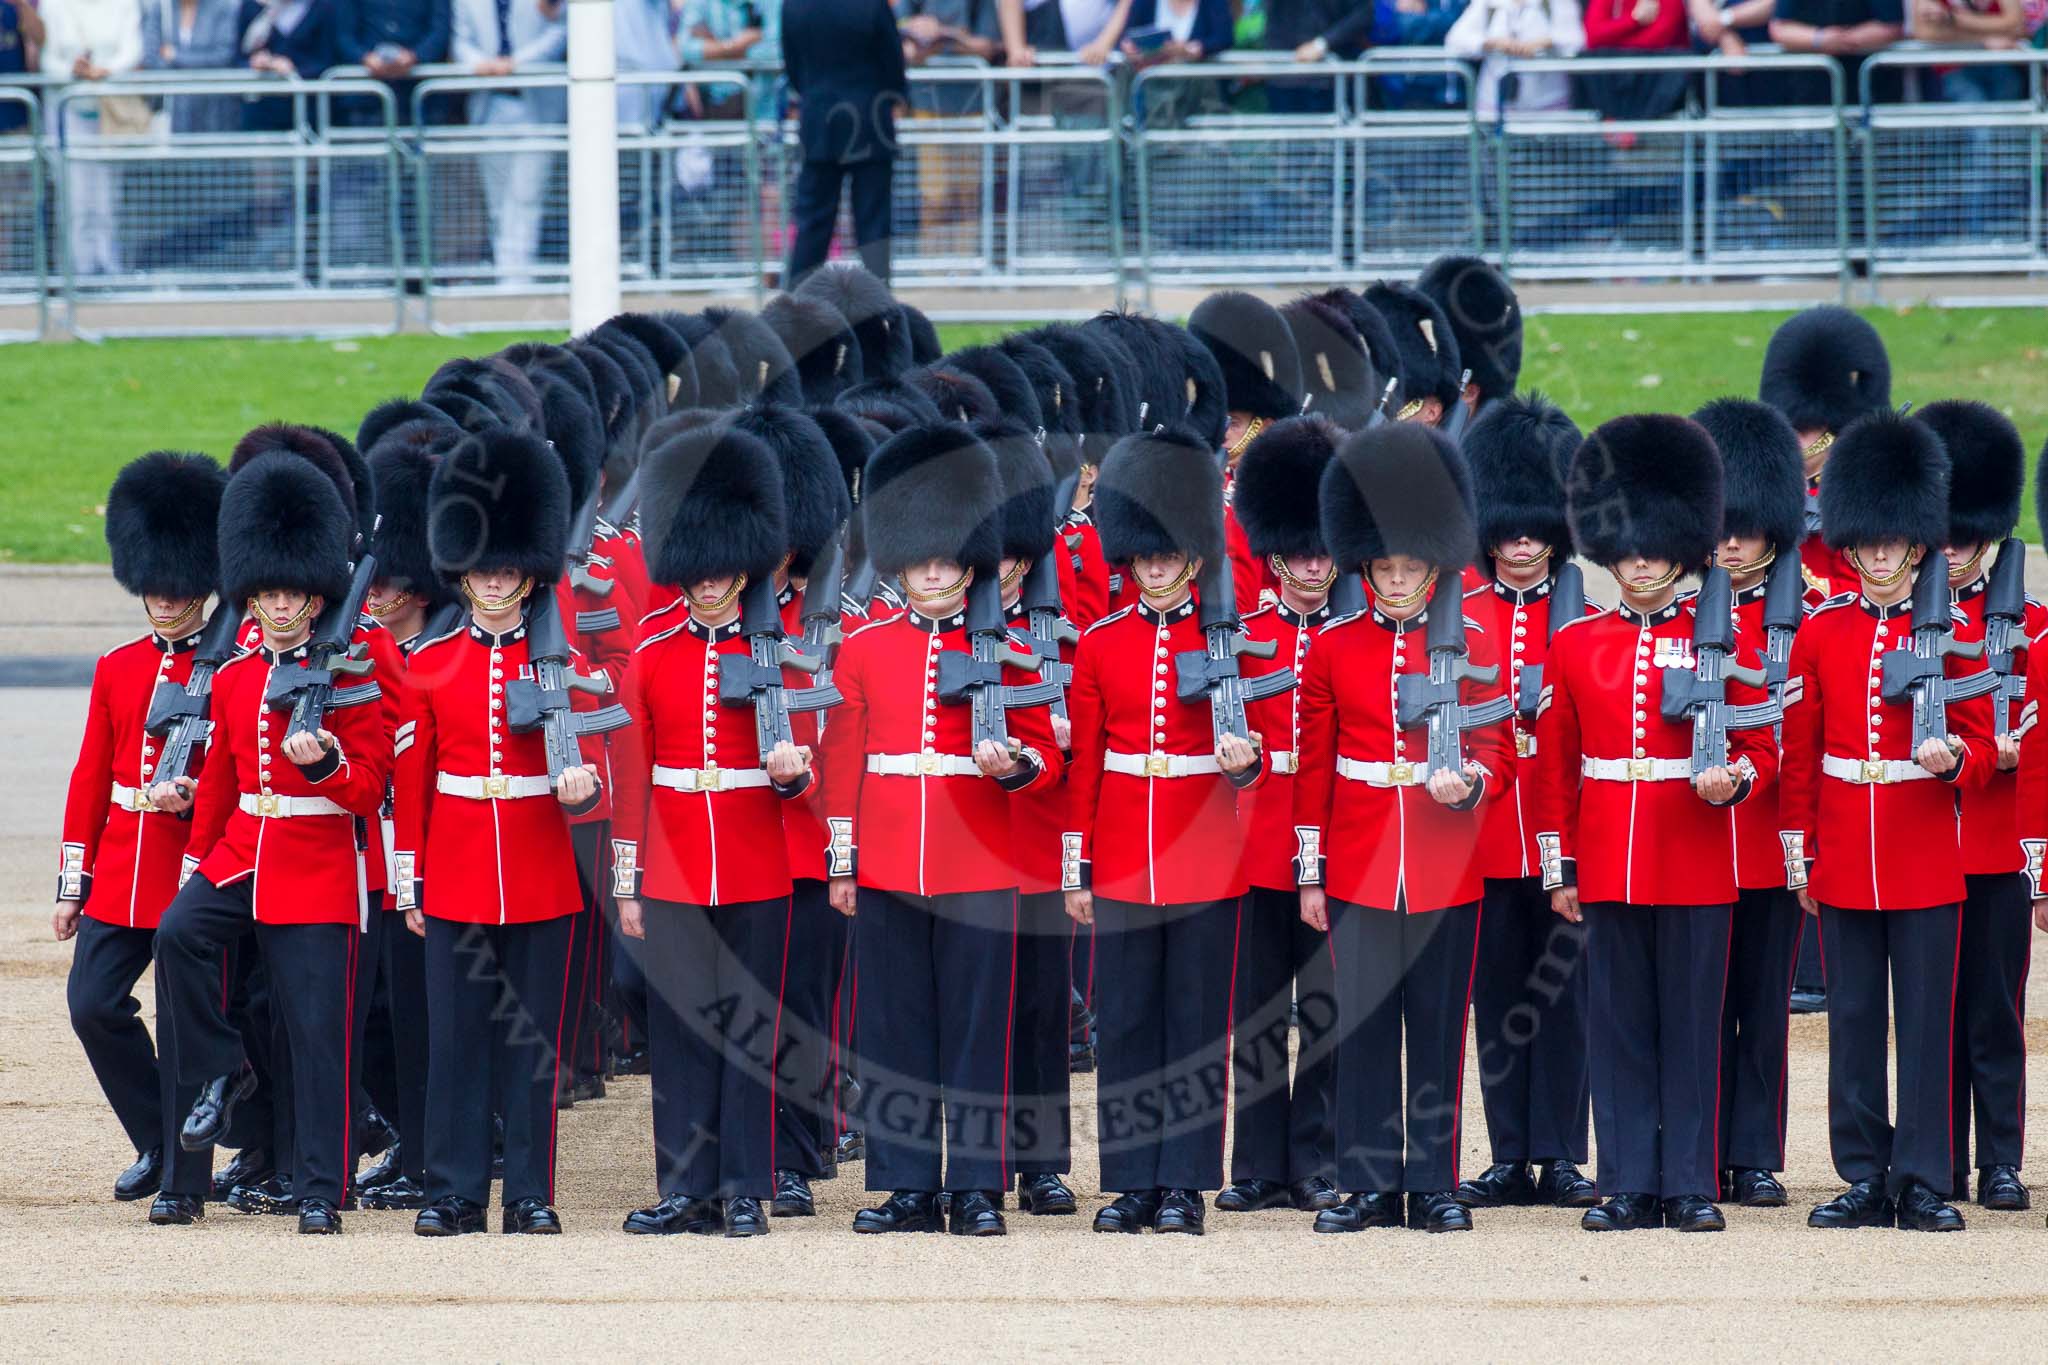 Trooping the Colour 2014.
Horse Guards Parade, Westminster,
London SW1A,

United Kingdom,
on 14 June 2014 at 10:36, image #222